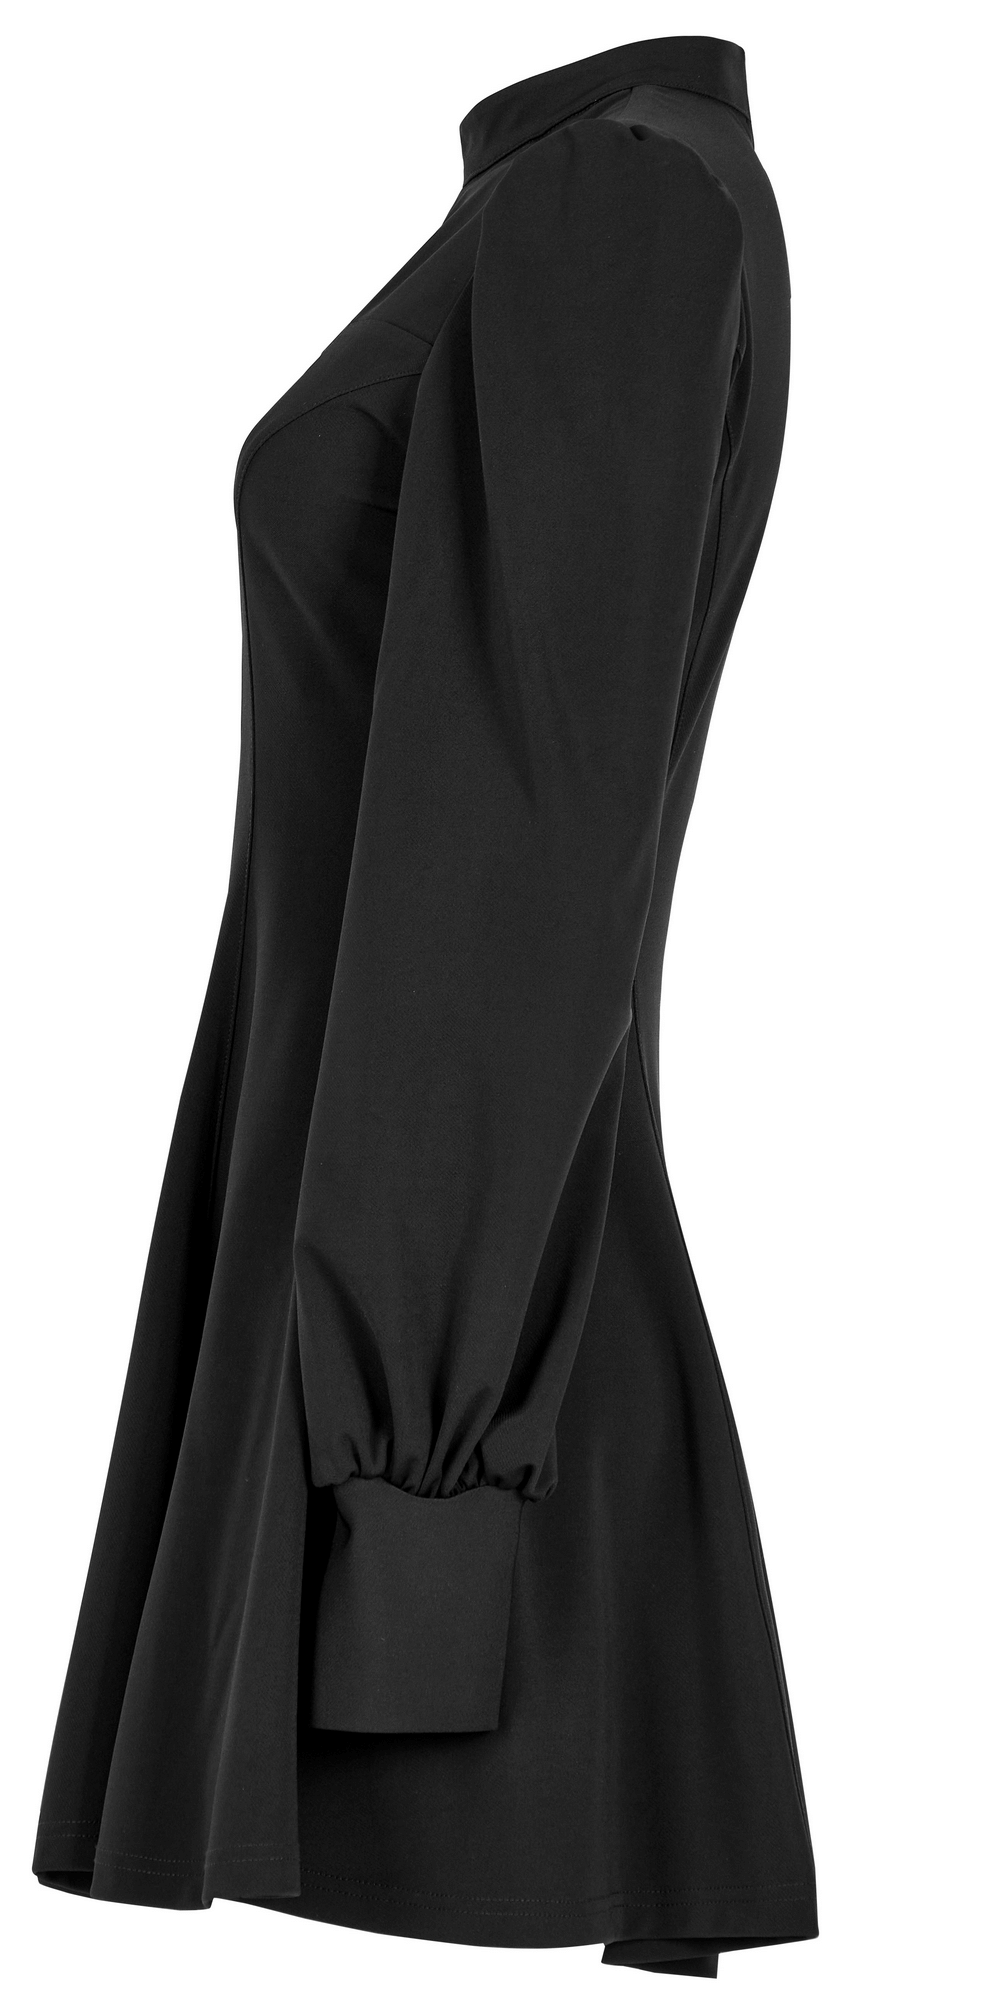 Chic A-Line Black Dress with Puff Sleeves and Cutout